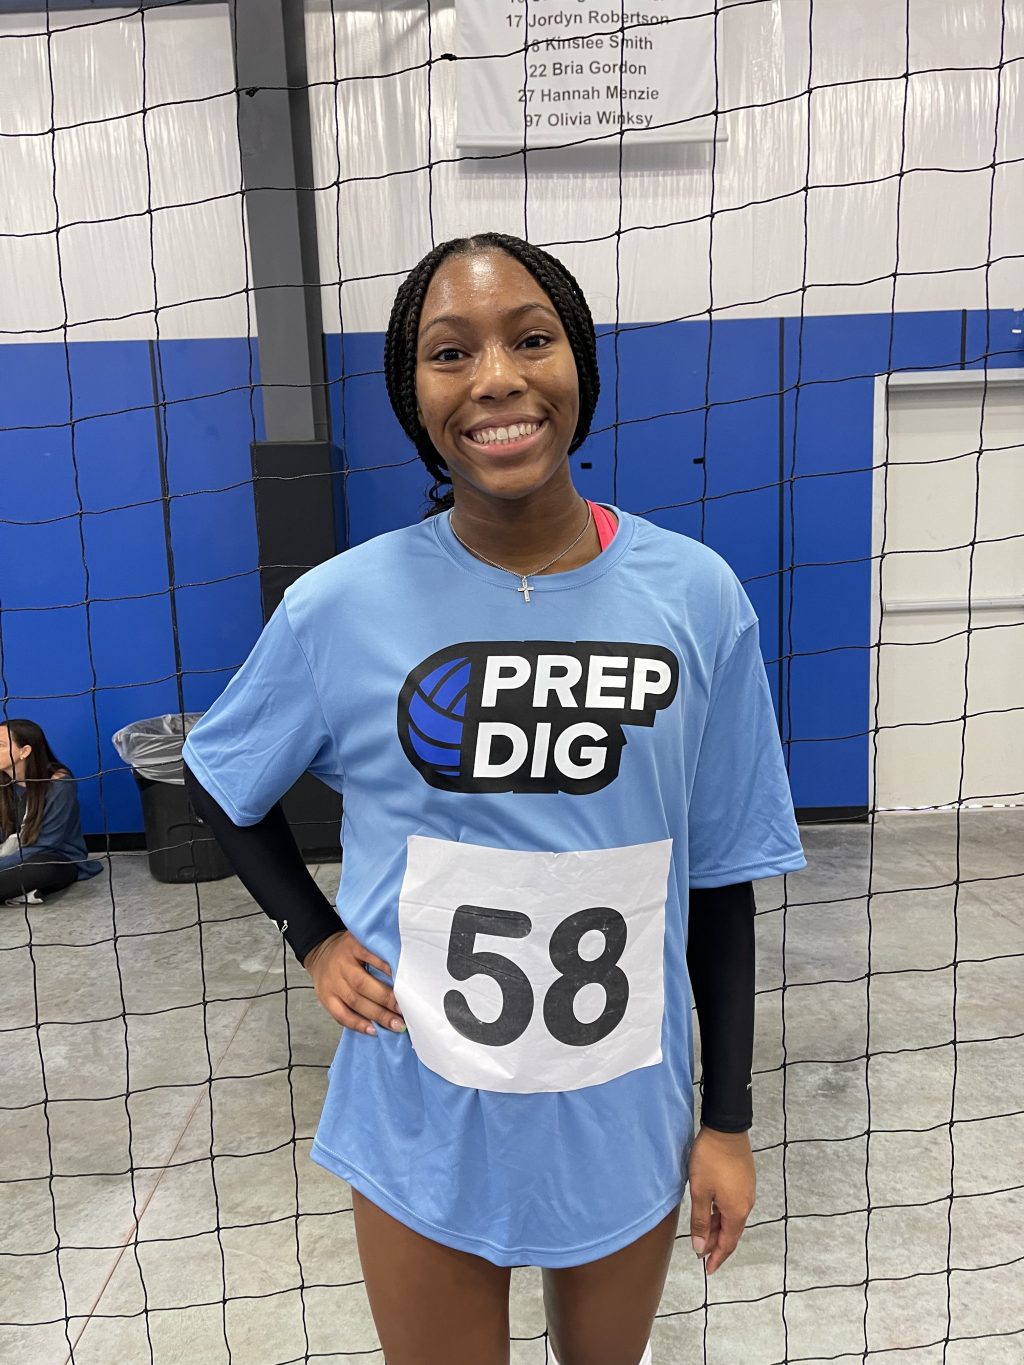 Houston Stop 1 Top 250 Expo Top Perfomers: Setters